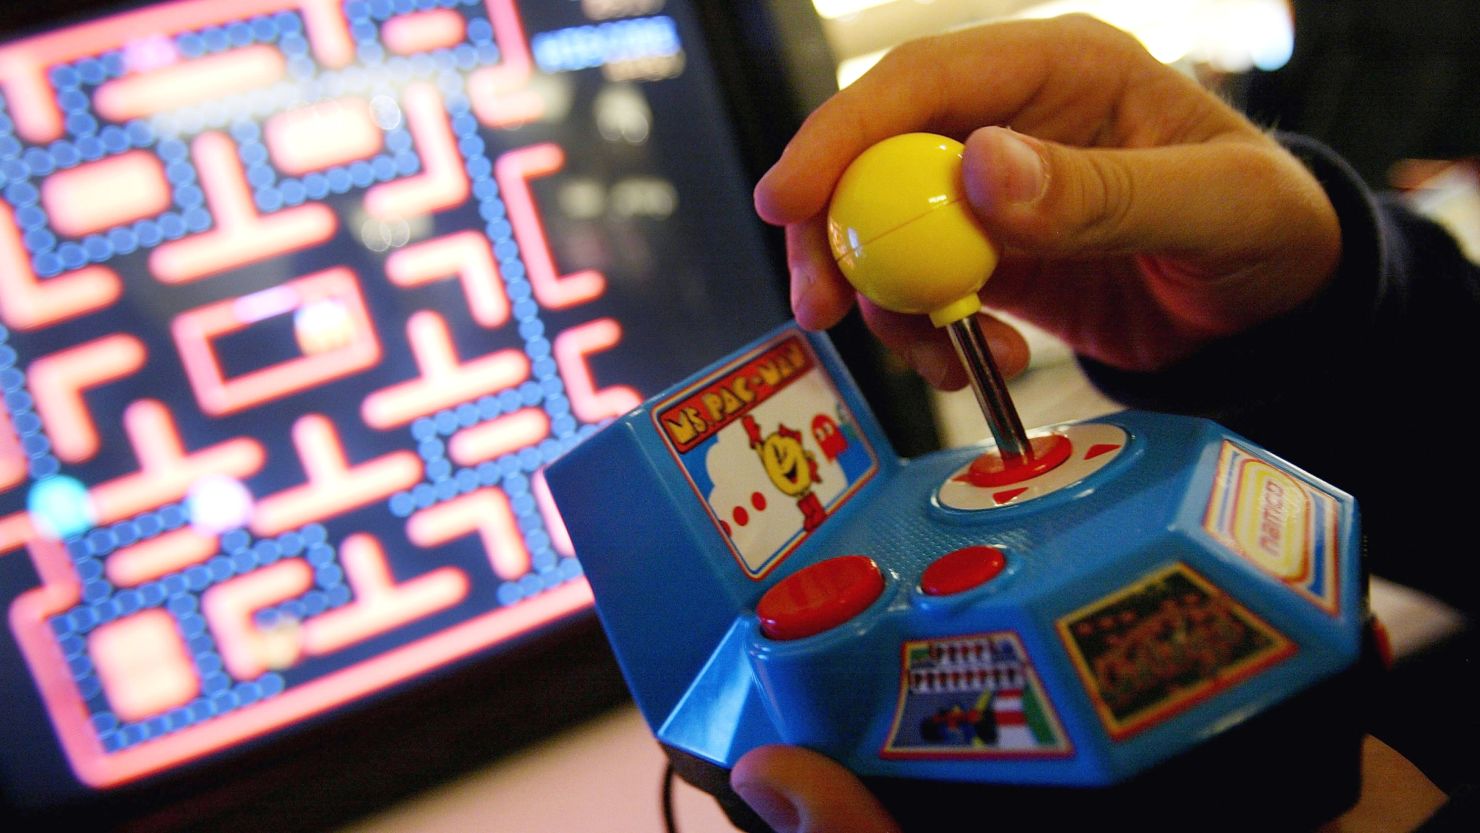 Ms. Pac-Man has been inducted into the World Video Game Hall of Fame.